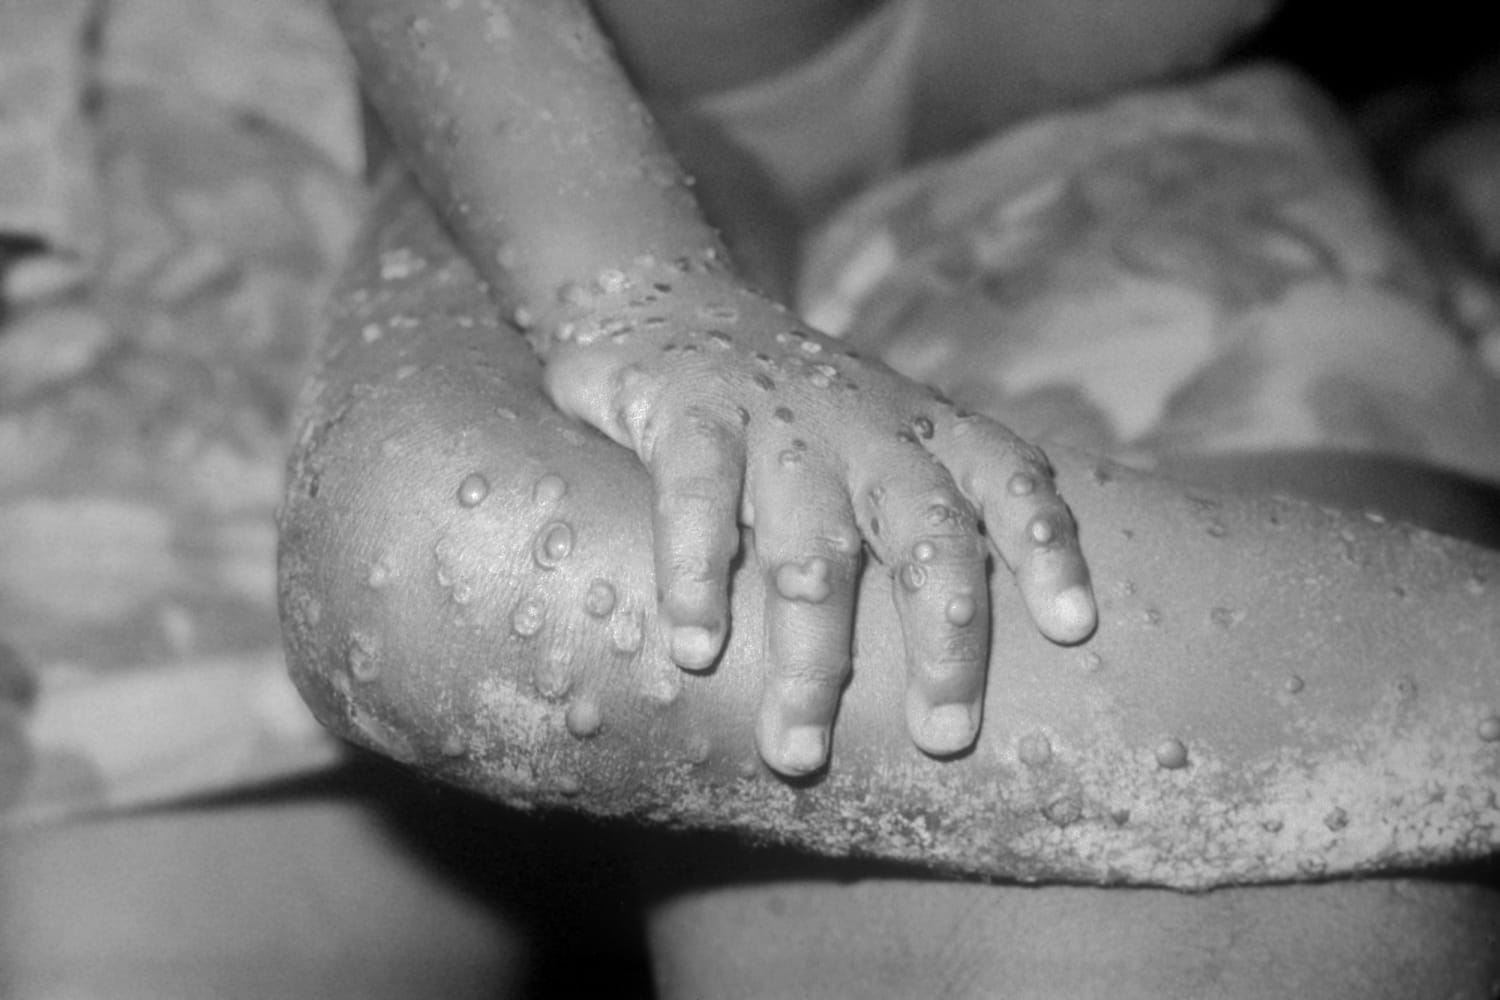 Monkeypox: How Worried Should We Be Right Now? - Connecticut Children's